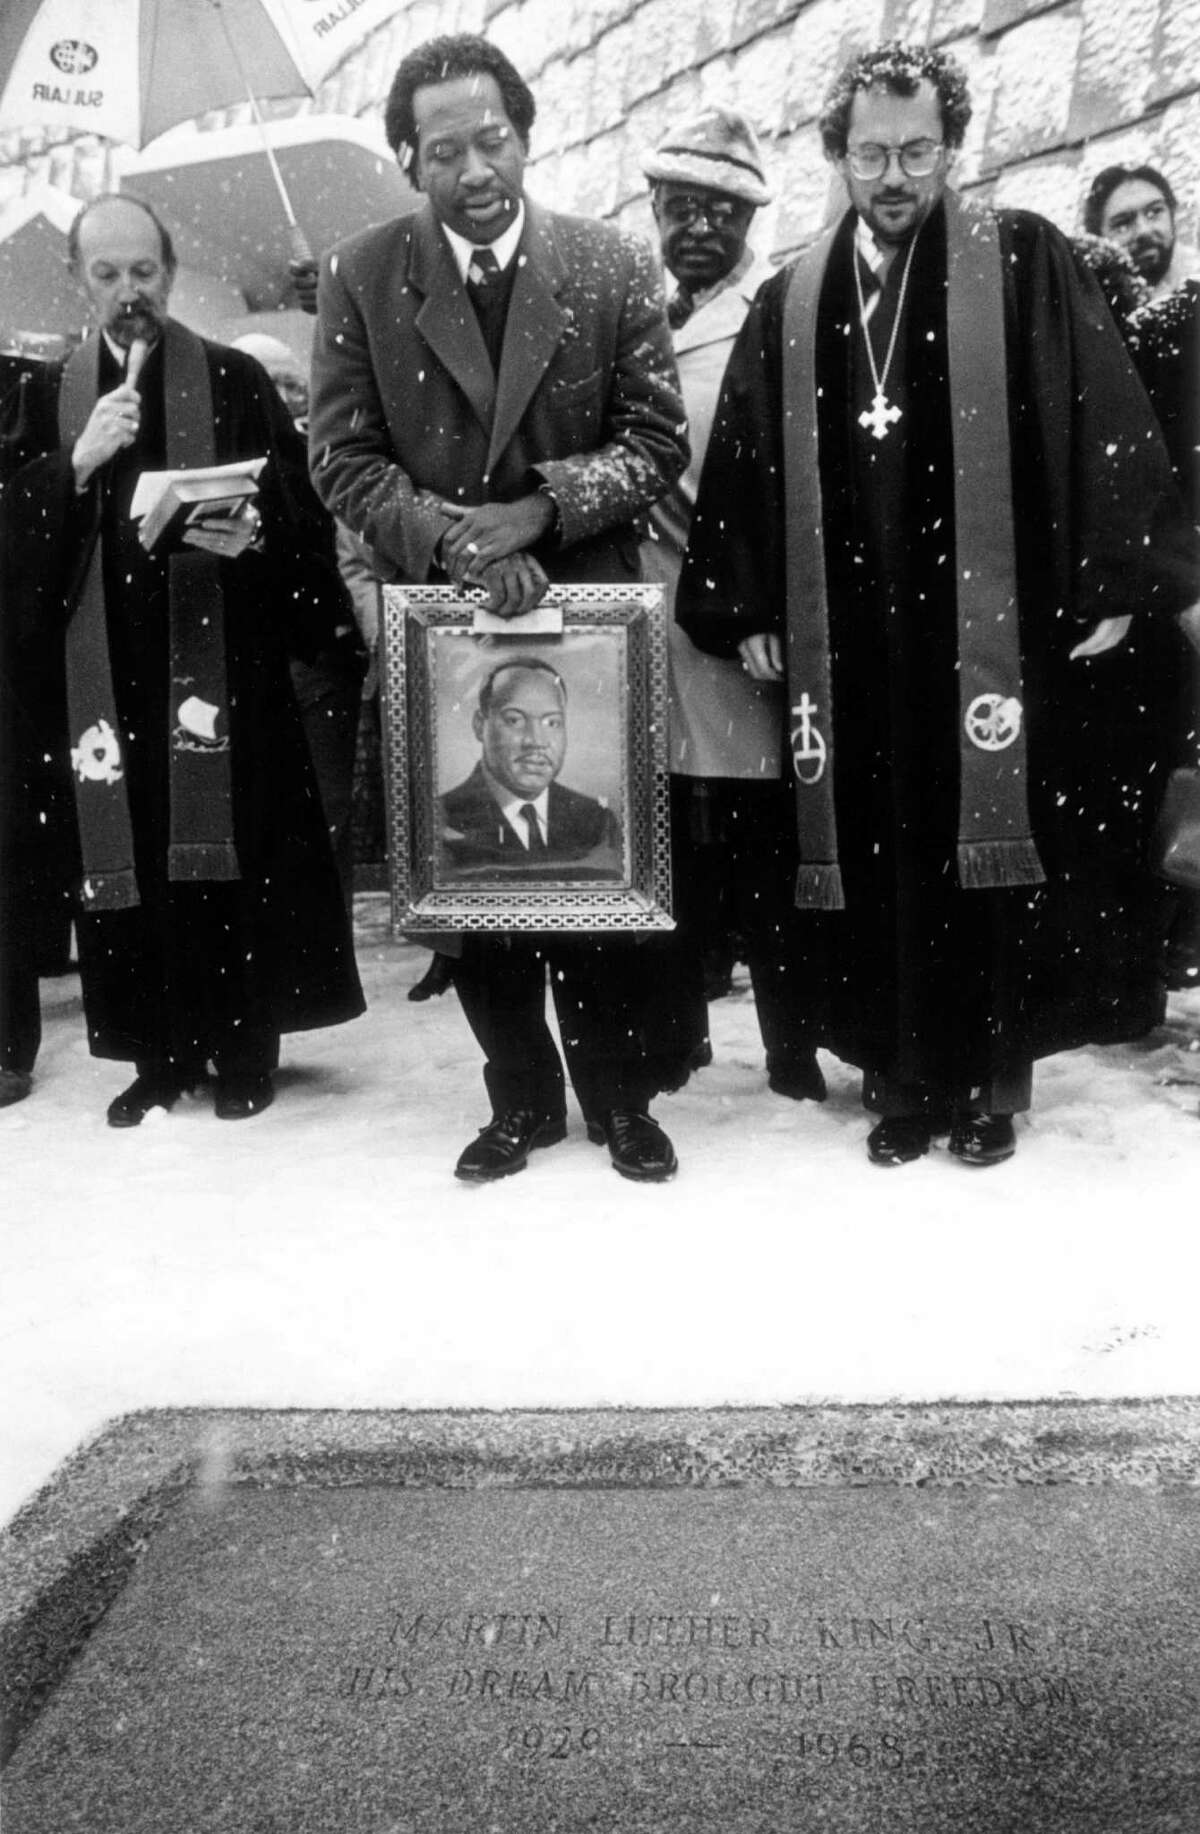 Jan/ 18, 1987: The Rev. Lorenzo Robinson holds a painting of the Rev. Dr. Martin Luther King Jr. while the Rev. Ronald James reads a statement dedicating a granite stone to the slain civil rights leader at the First Presbyterian Church in Stamford. The Rev. David Van Dyke, right, and the Rev. Sylvester Maultsba look on. Robinson dies Oct. 24, 2013.